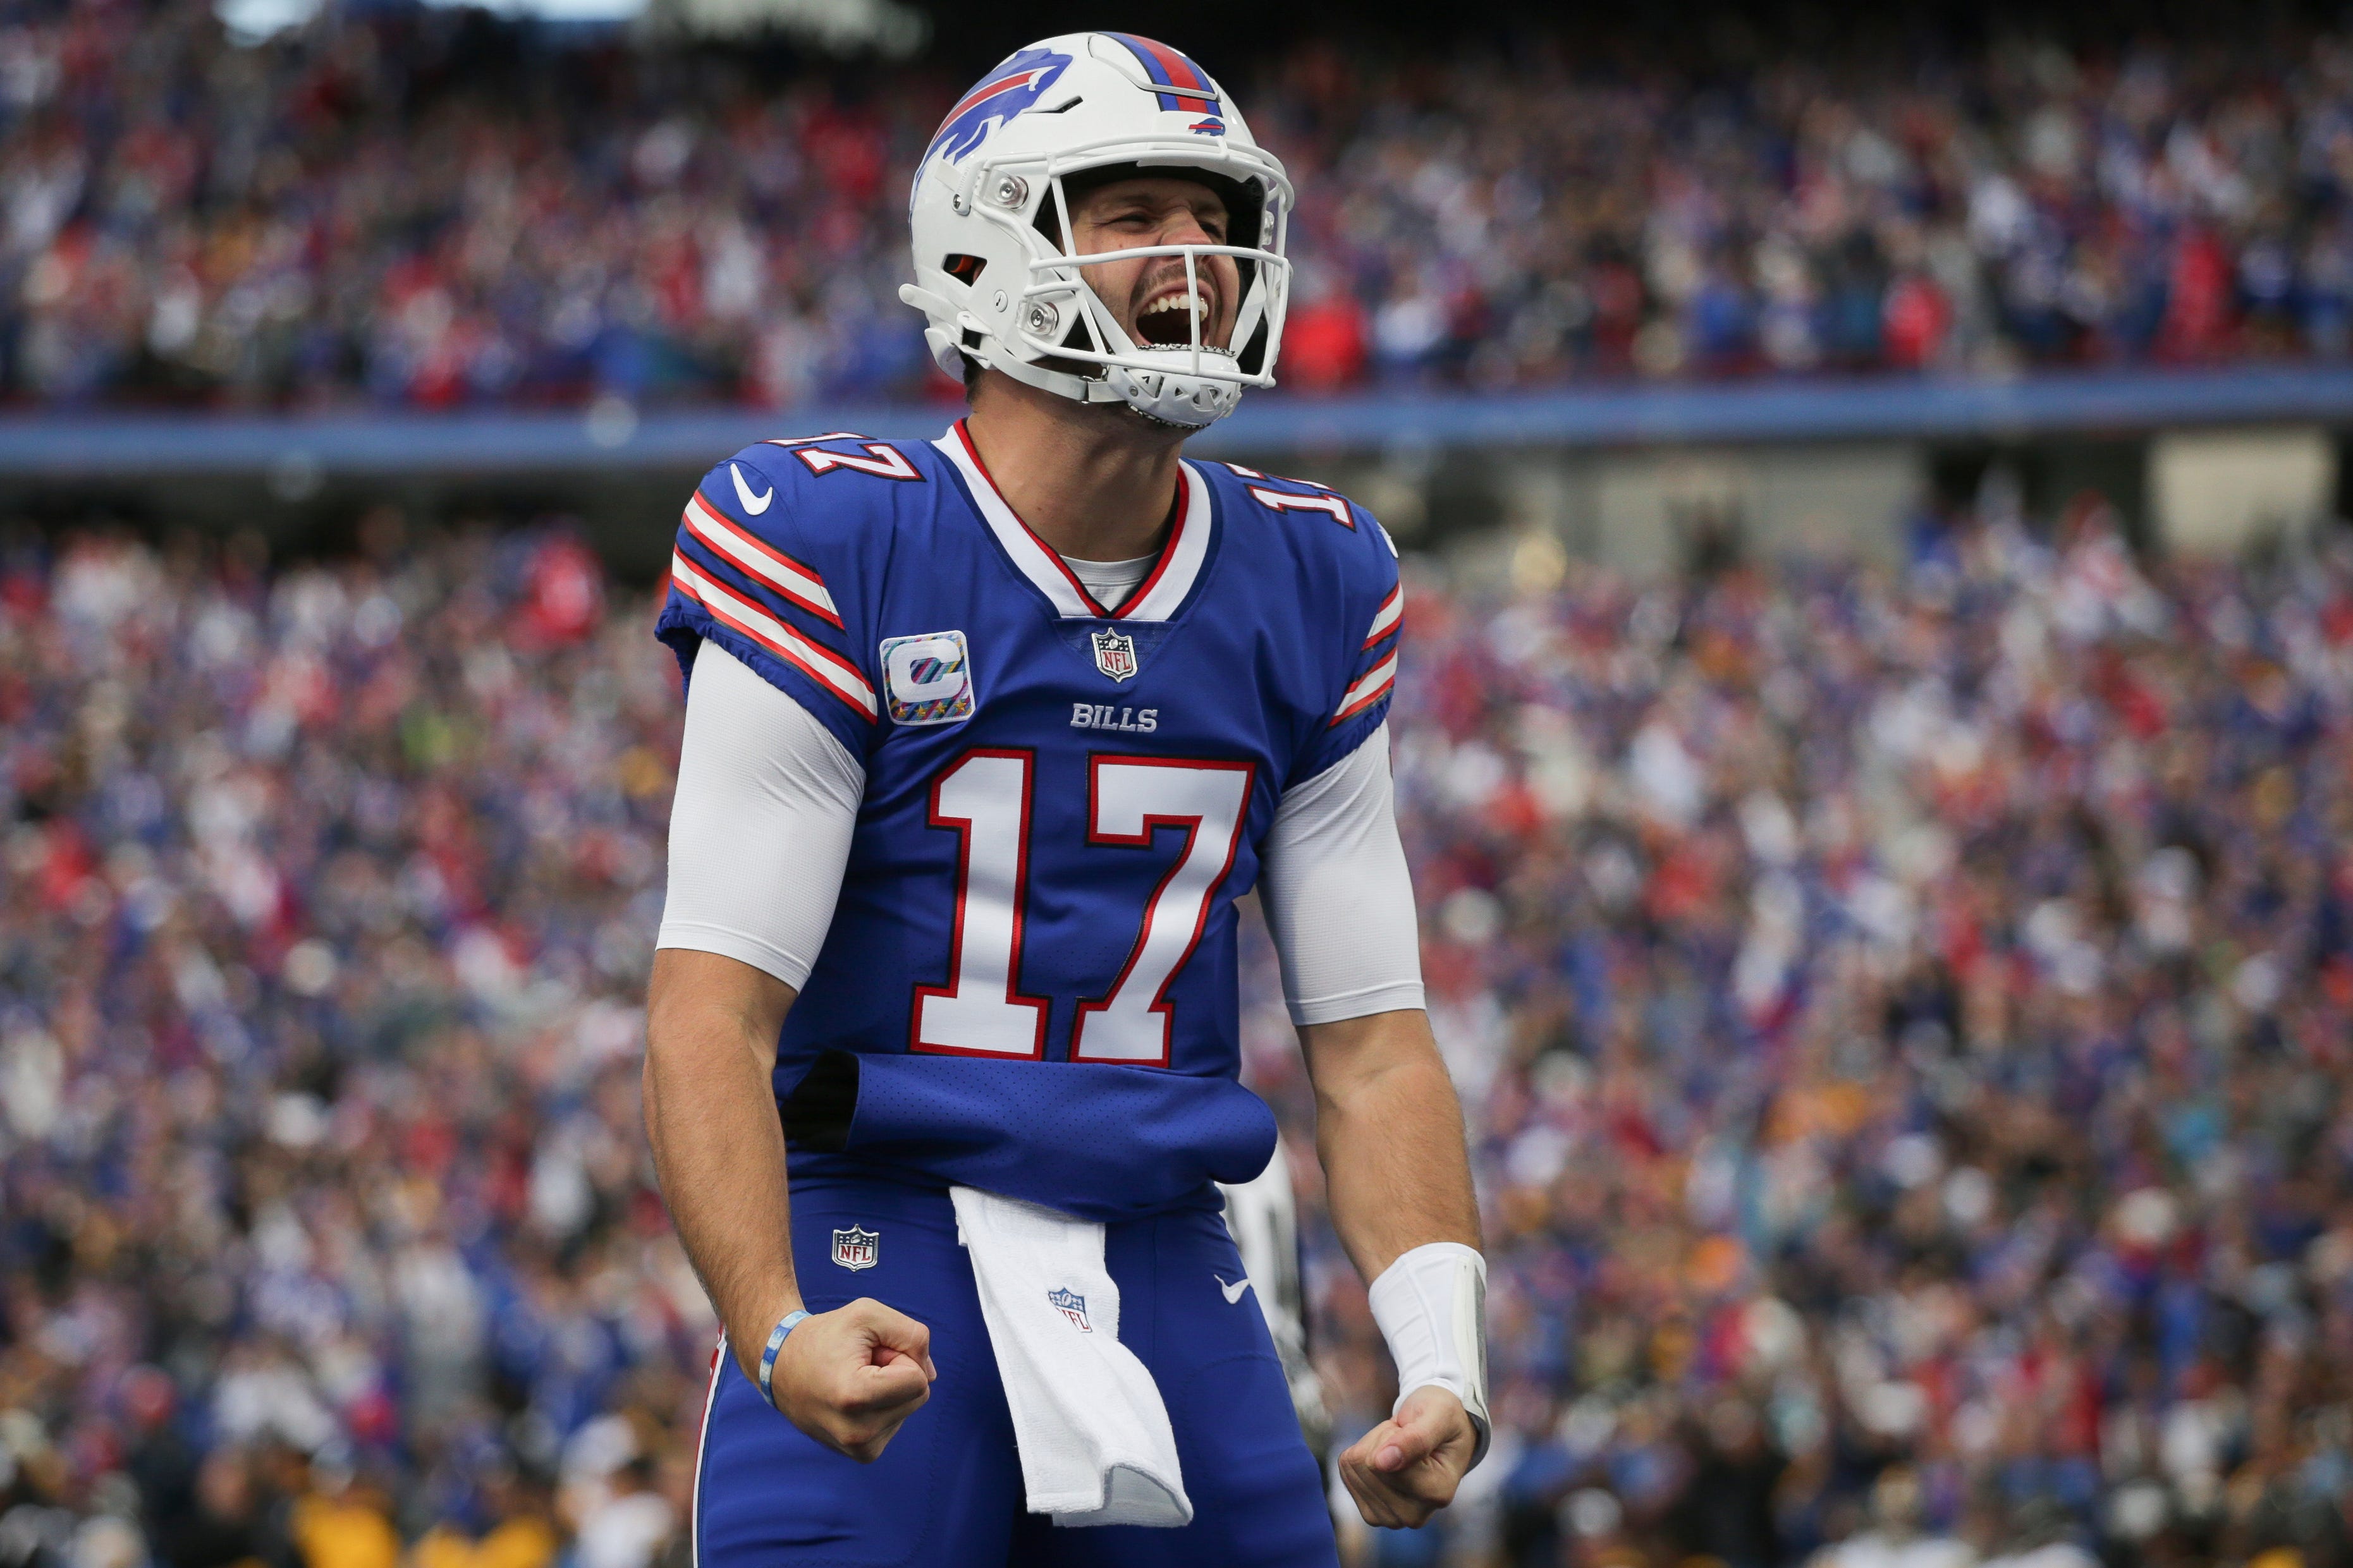 Josh Allen has more total yards than almost every NFL team this year